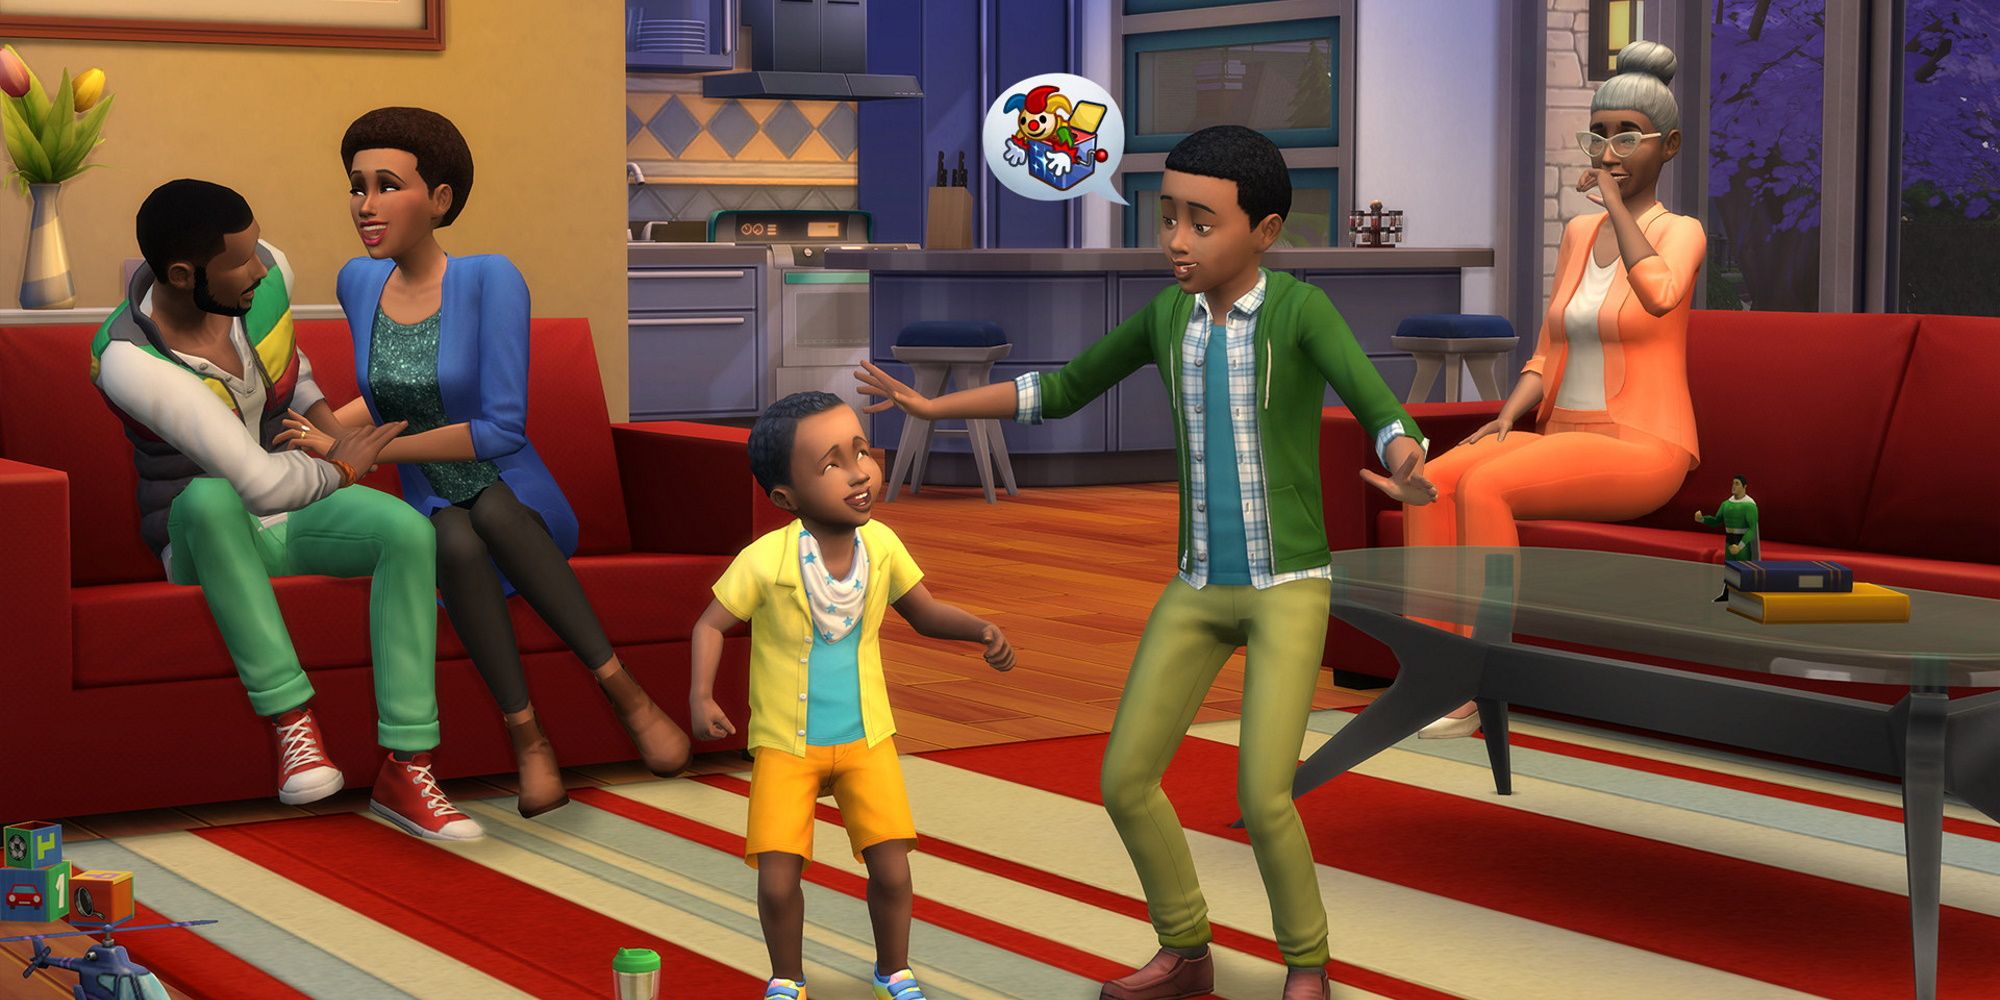 Sims 4 family with parents, a grandparent and two children. 